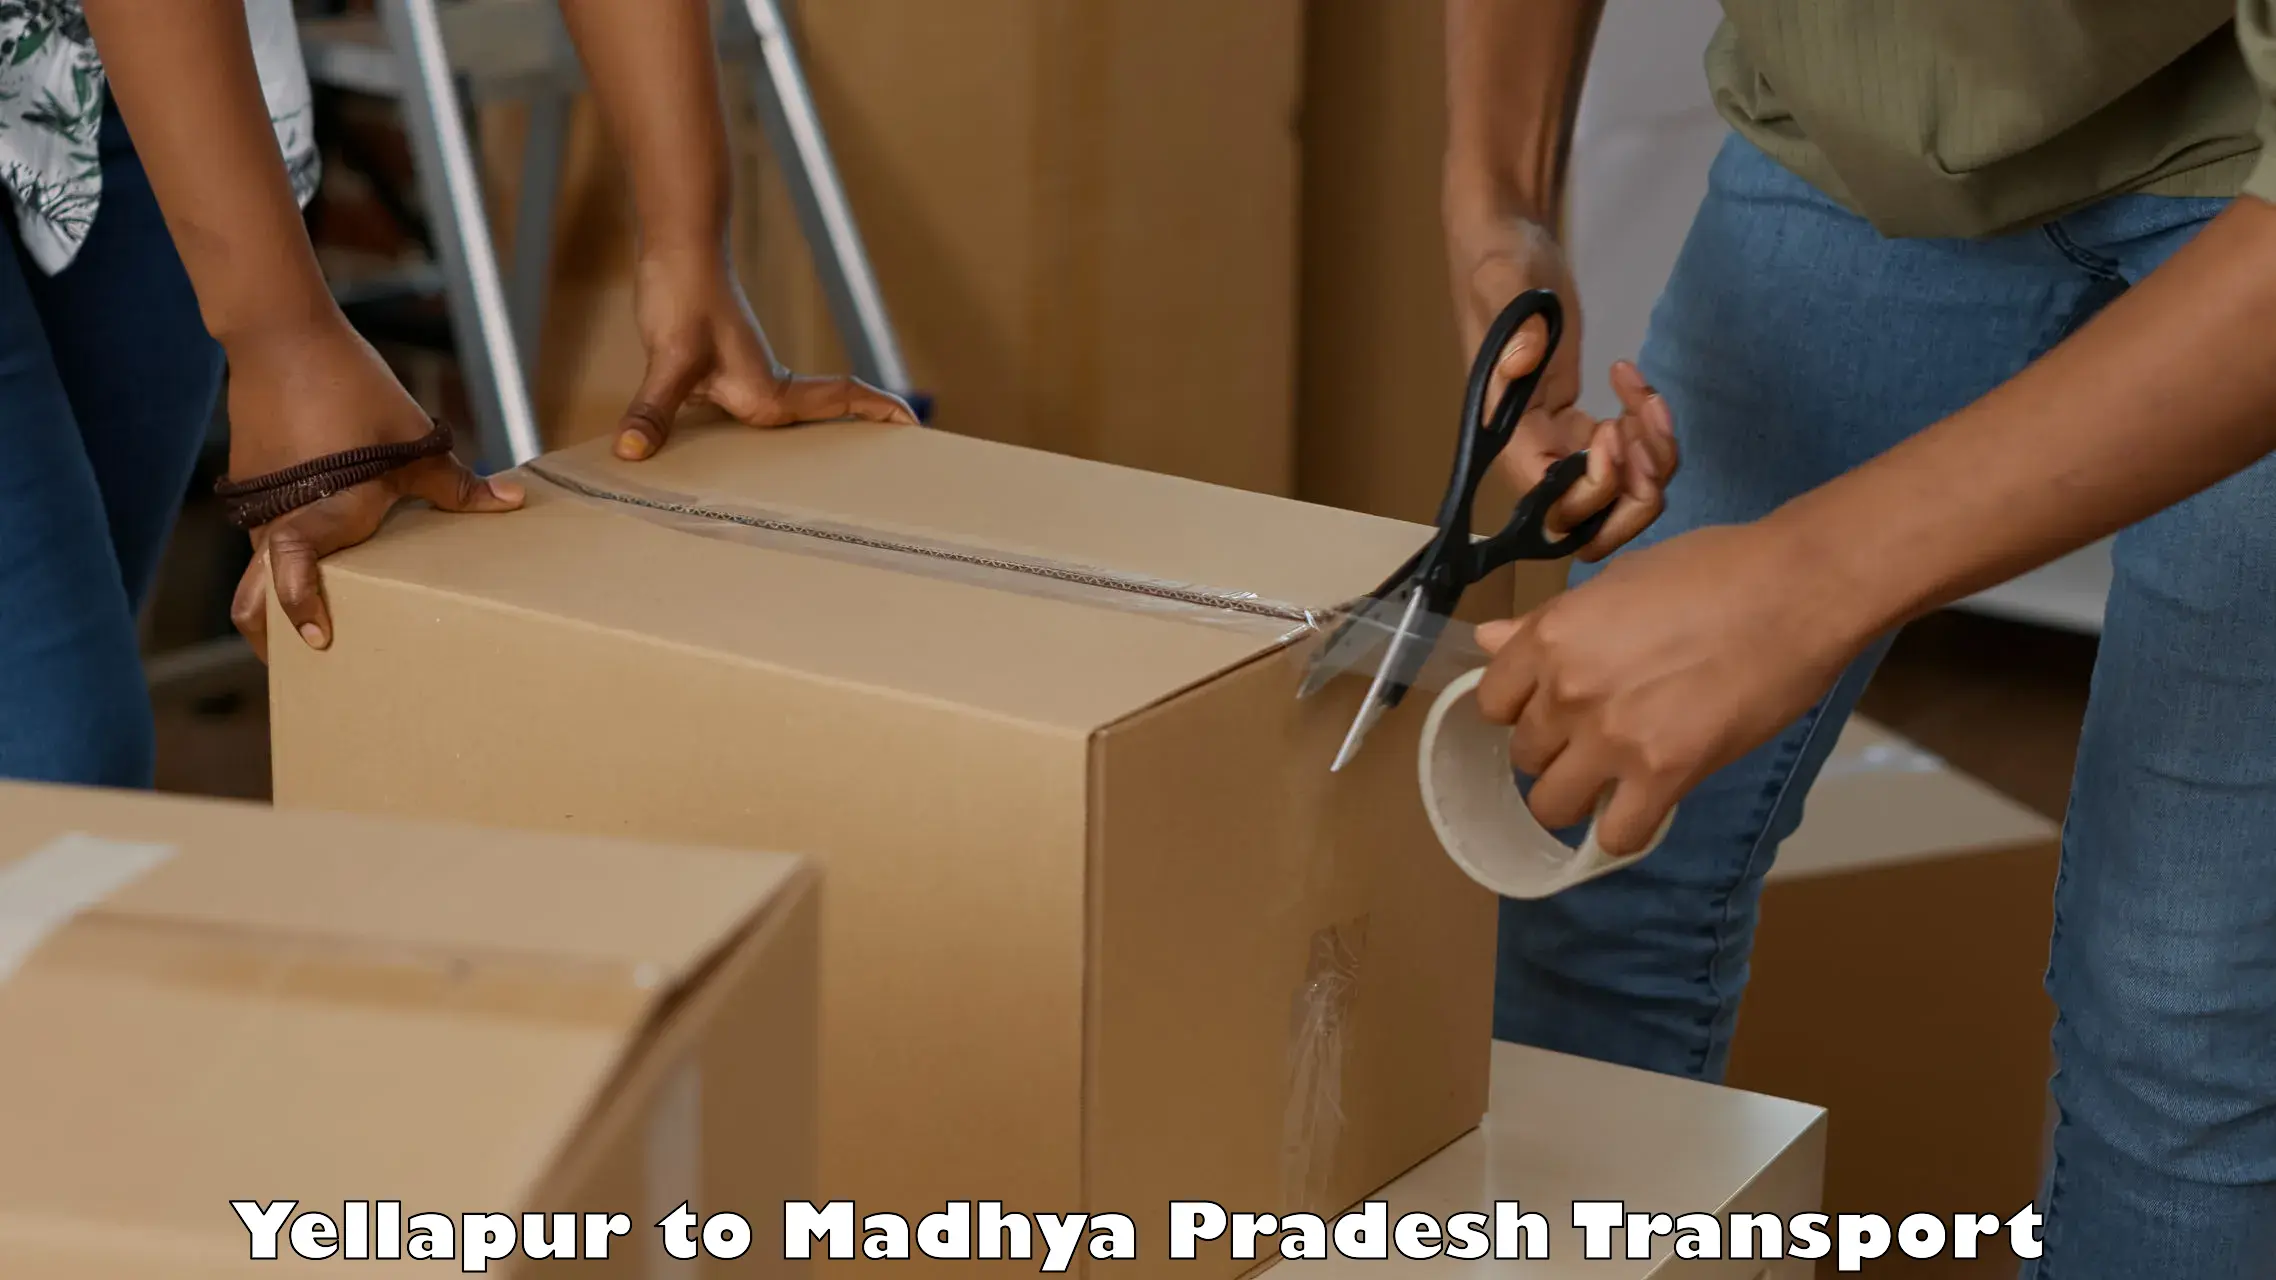 Goods delivery service Yellapur to Kesali